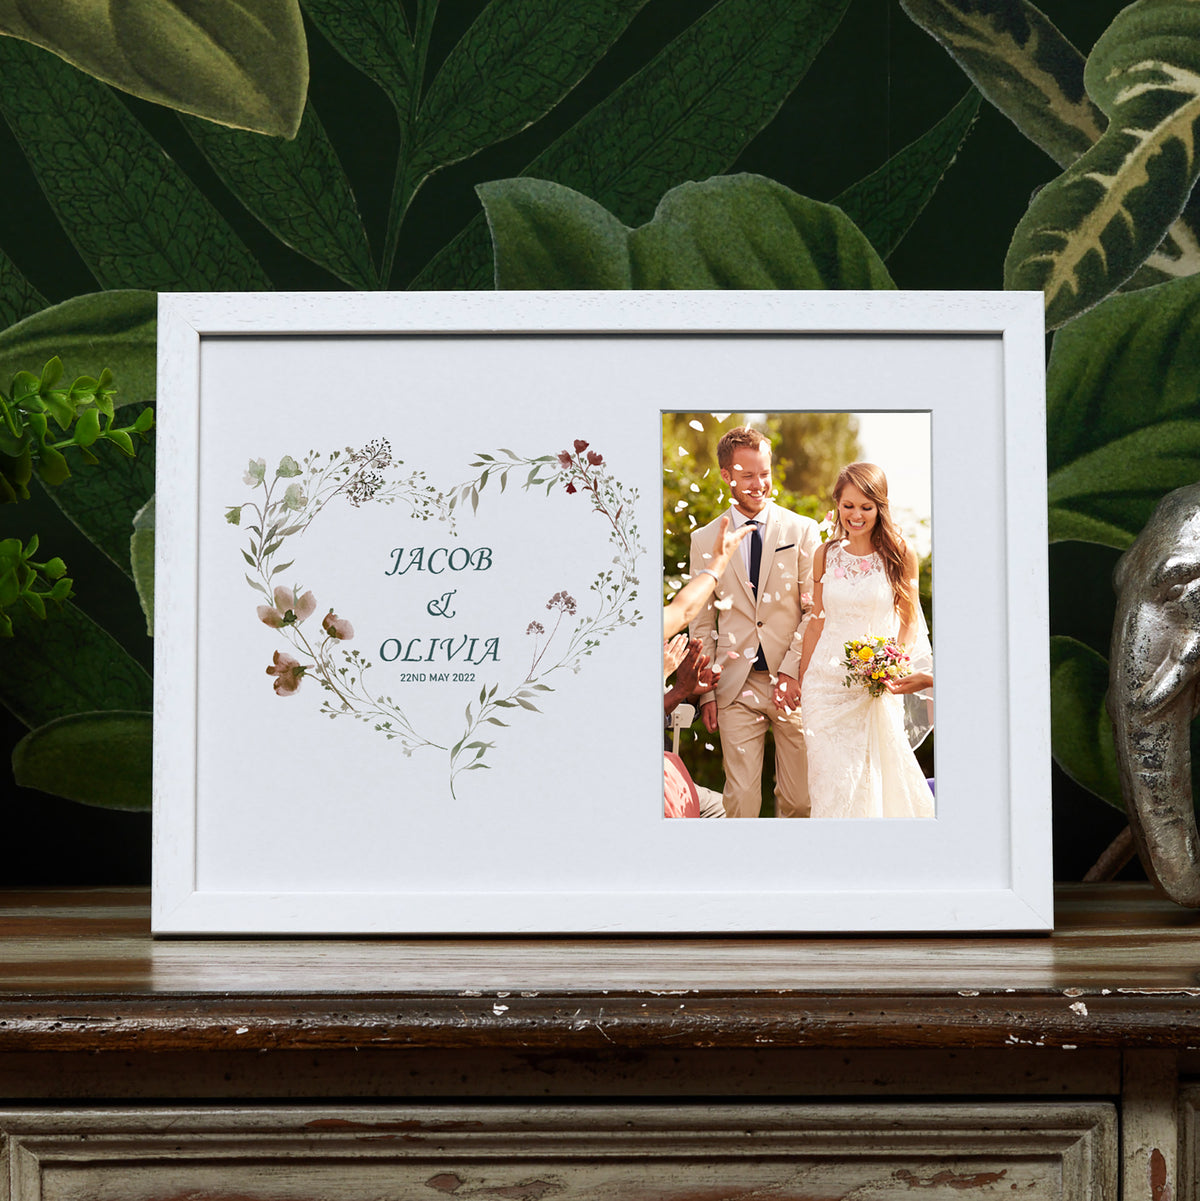 Personalised Wedding Photo Frame With Watercolour Floral Heart